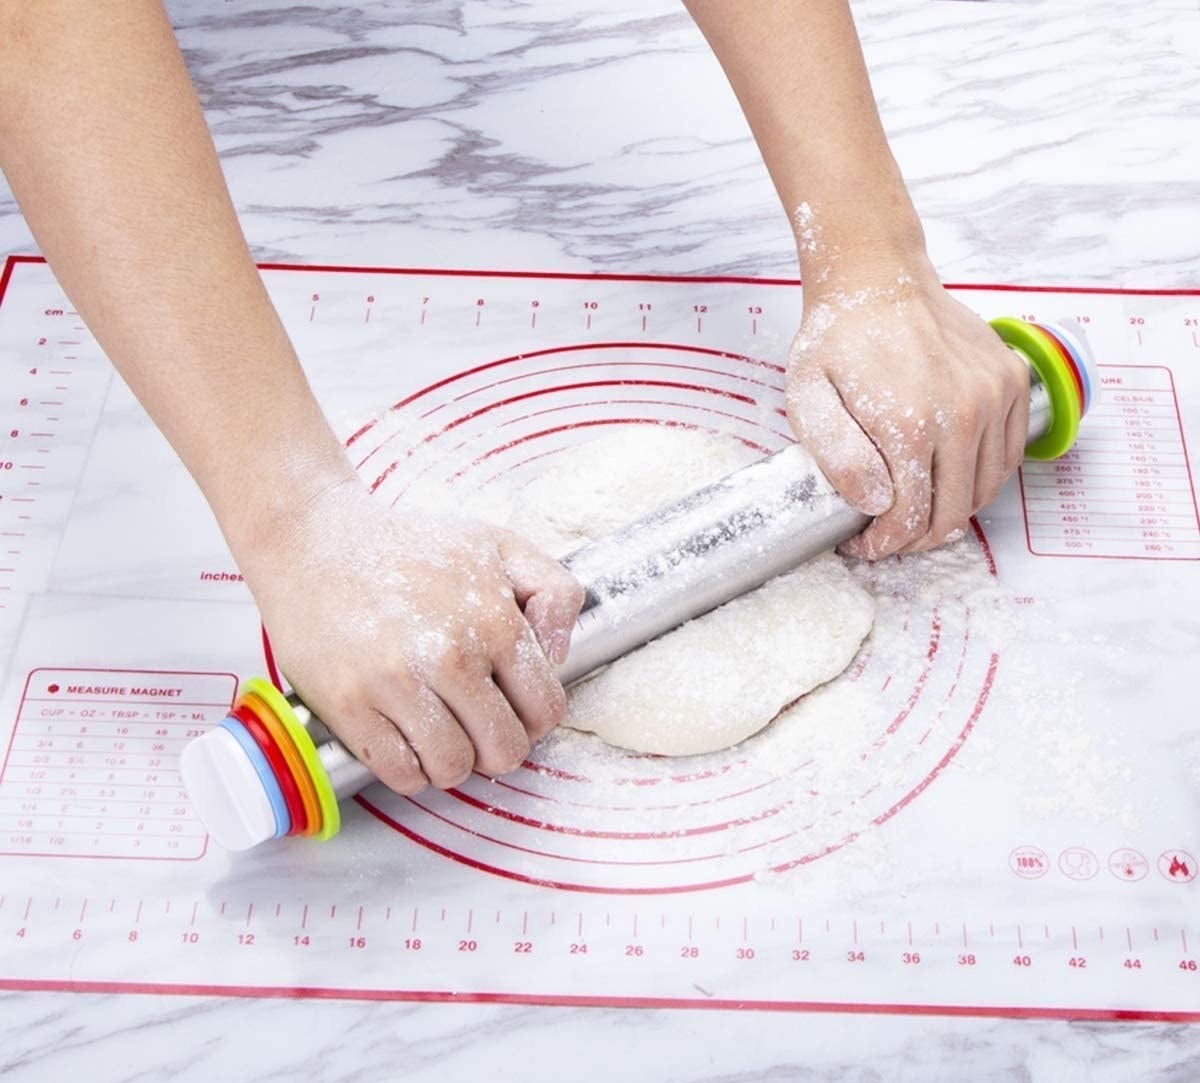 Model using the adjustable rolling pin to roll out dough on top of a baking mat